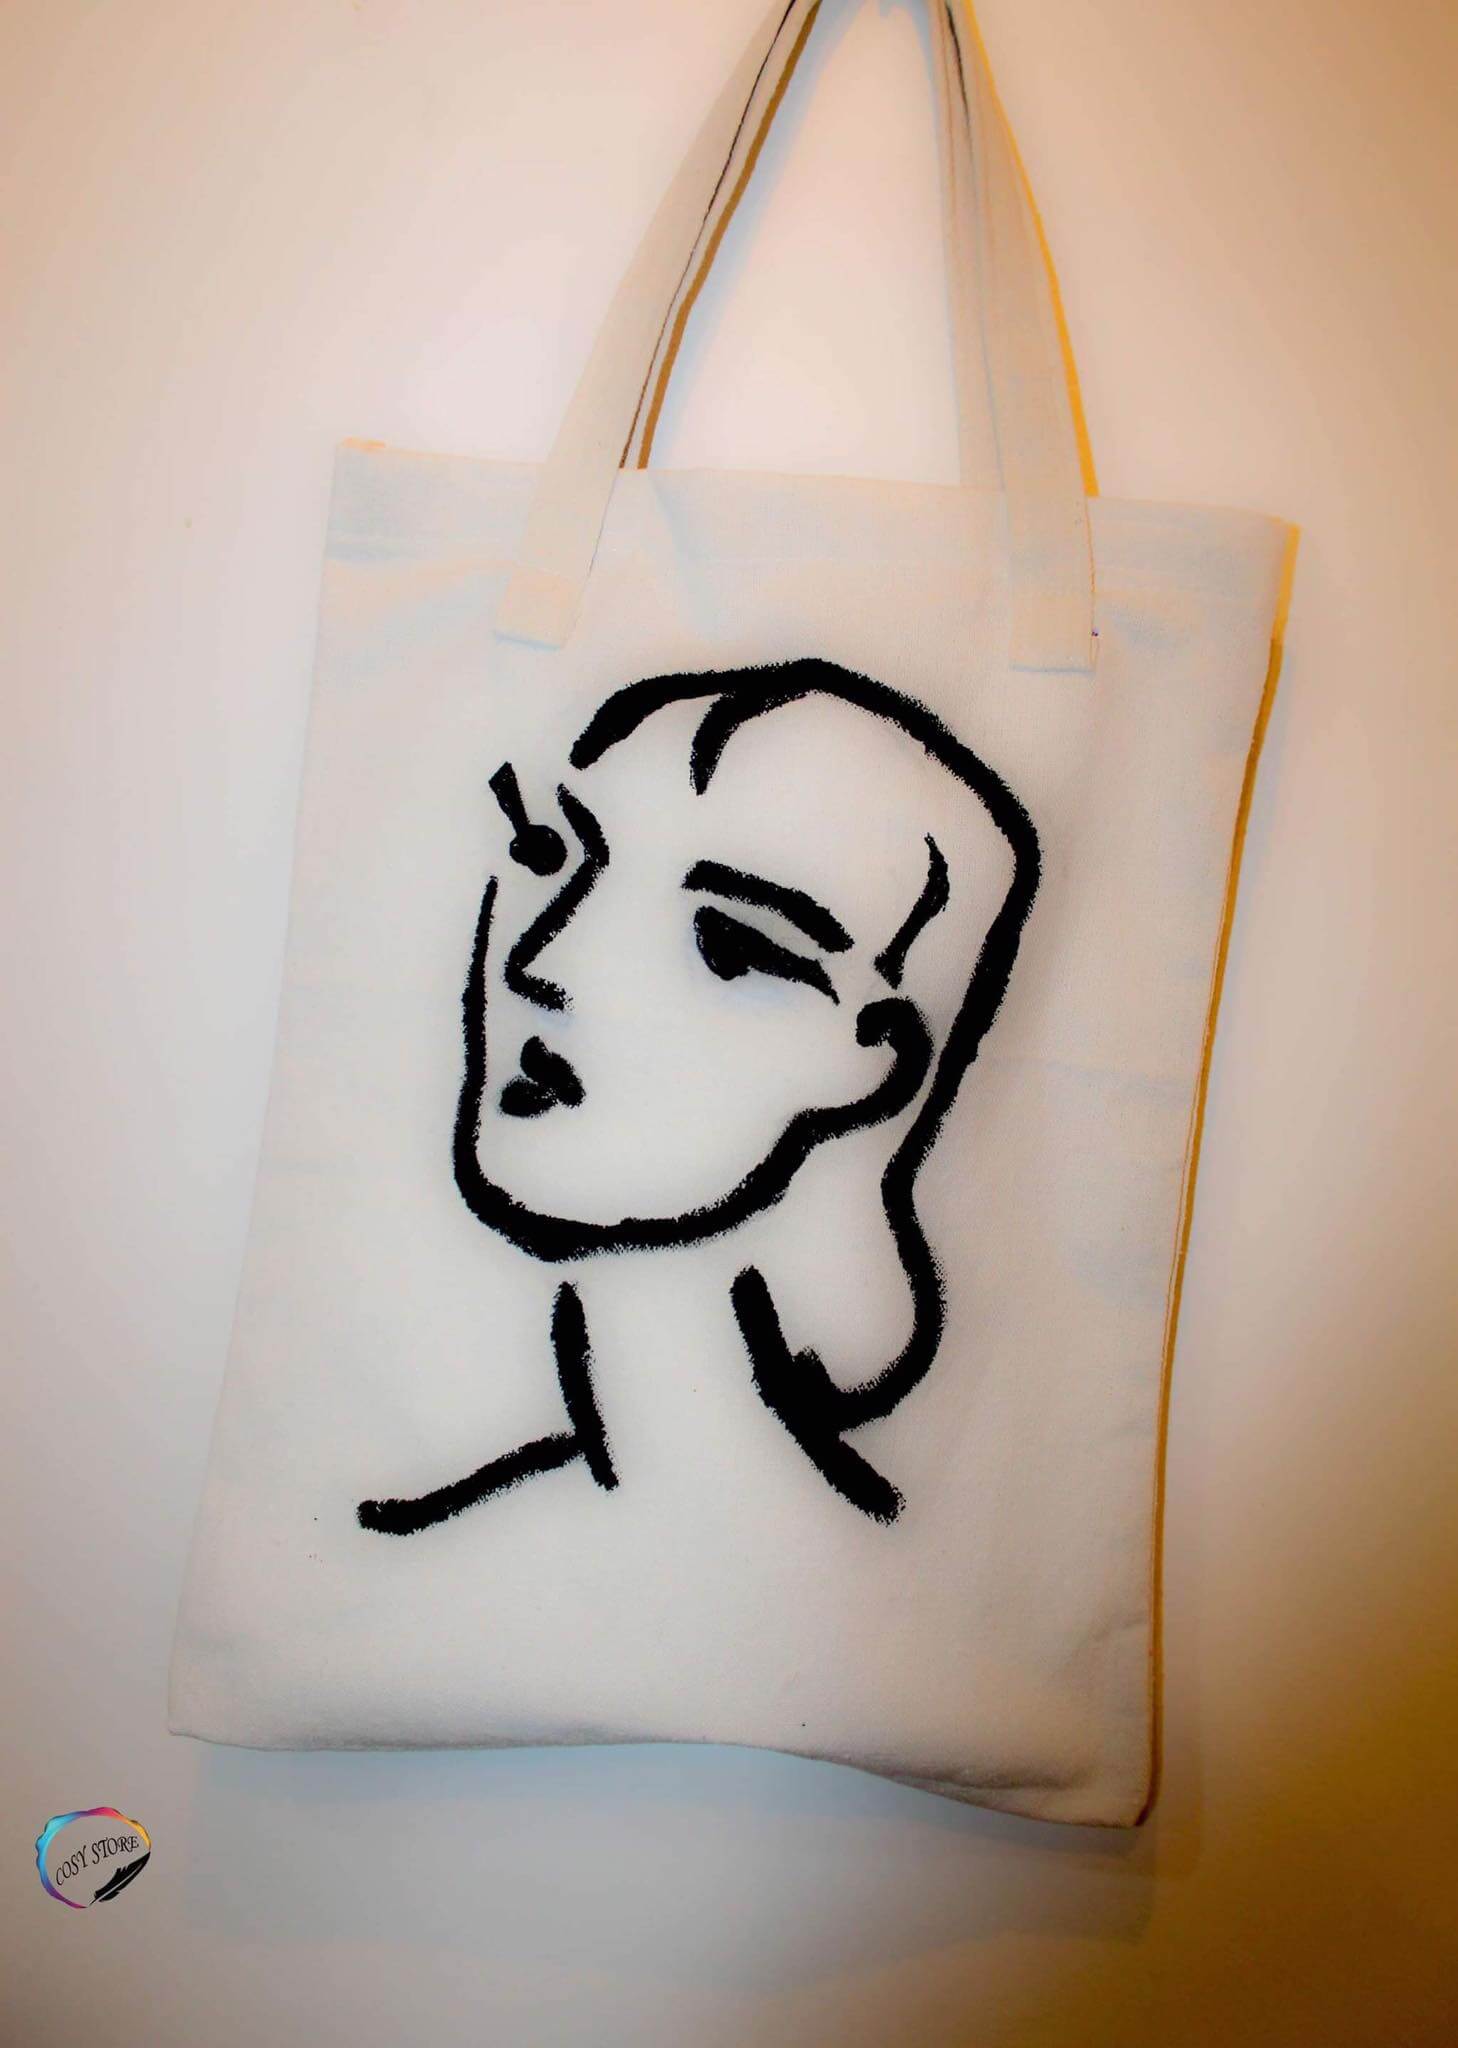 The Mathilde tote bag